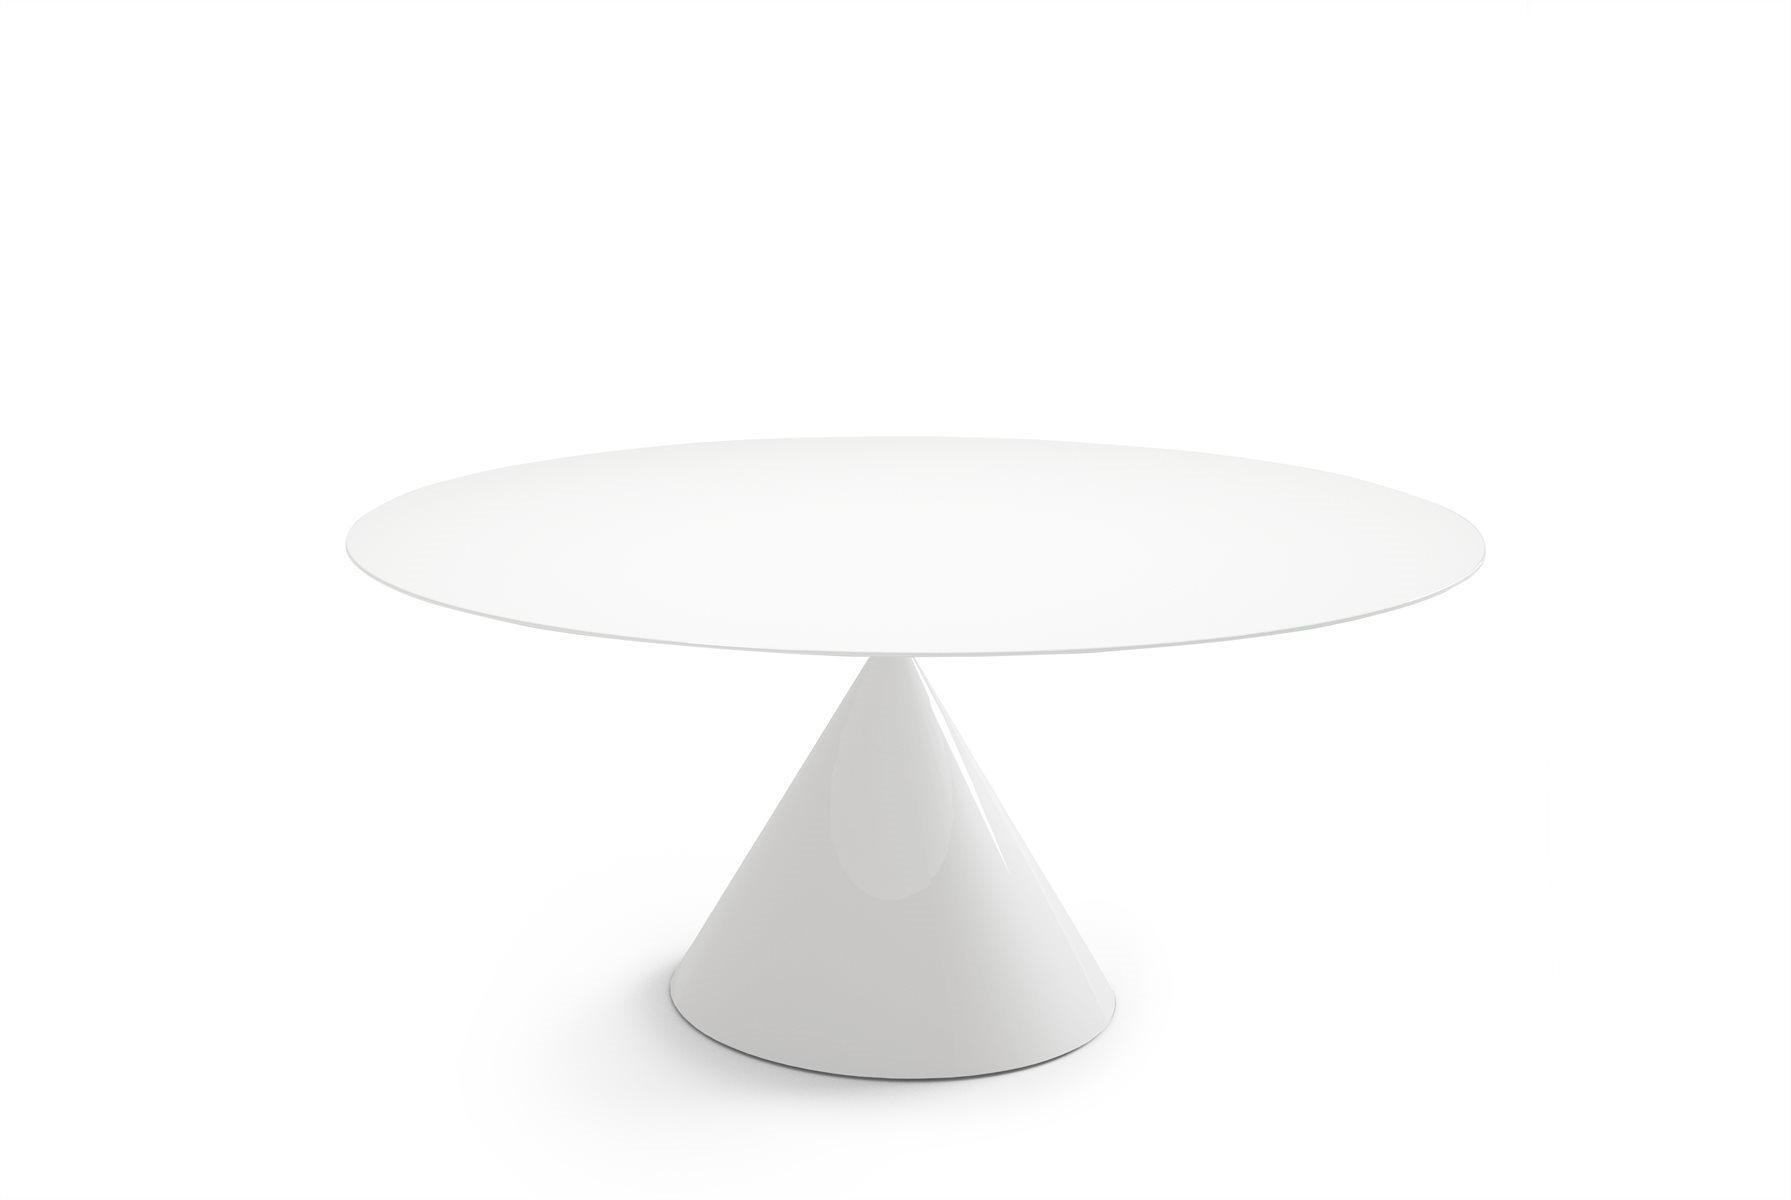 Customizable Desalto Clay Oval Table by Marc Krusin For Sale 7